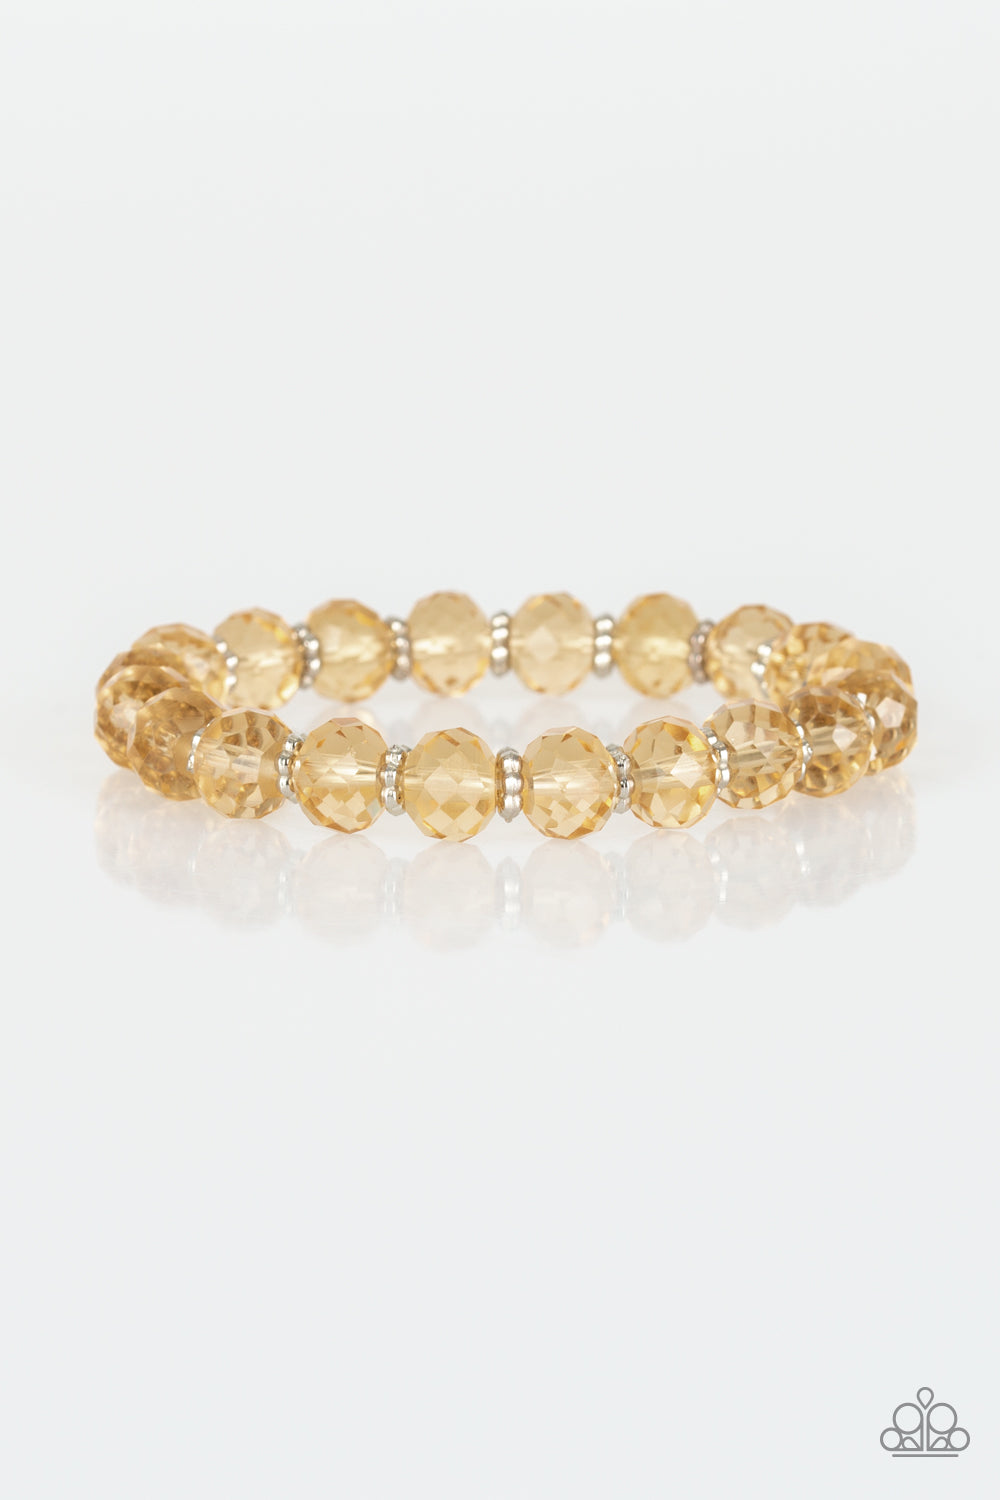 Crystal Candelabras Gold Bracelet - Paparazzi Accessories  Glittery crystal-like beads and studded silver rings are threaded along a stretchy band around the wrist for a sophisticated look.  All Paparazzi Accessories are lead free and nickel free!  Sold as one individual bracelet.